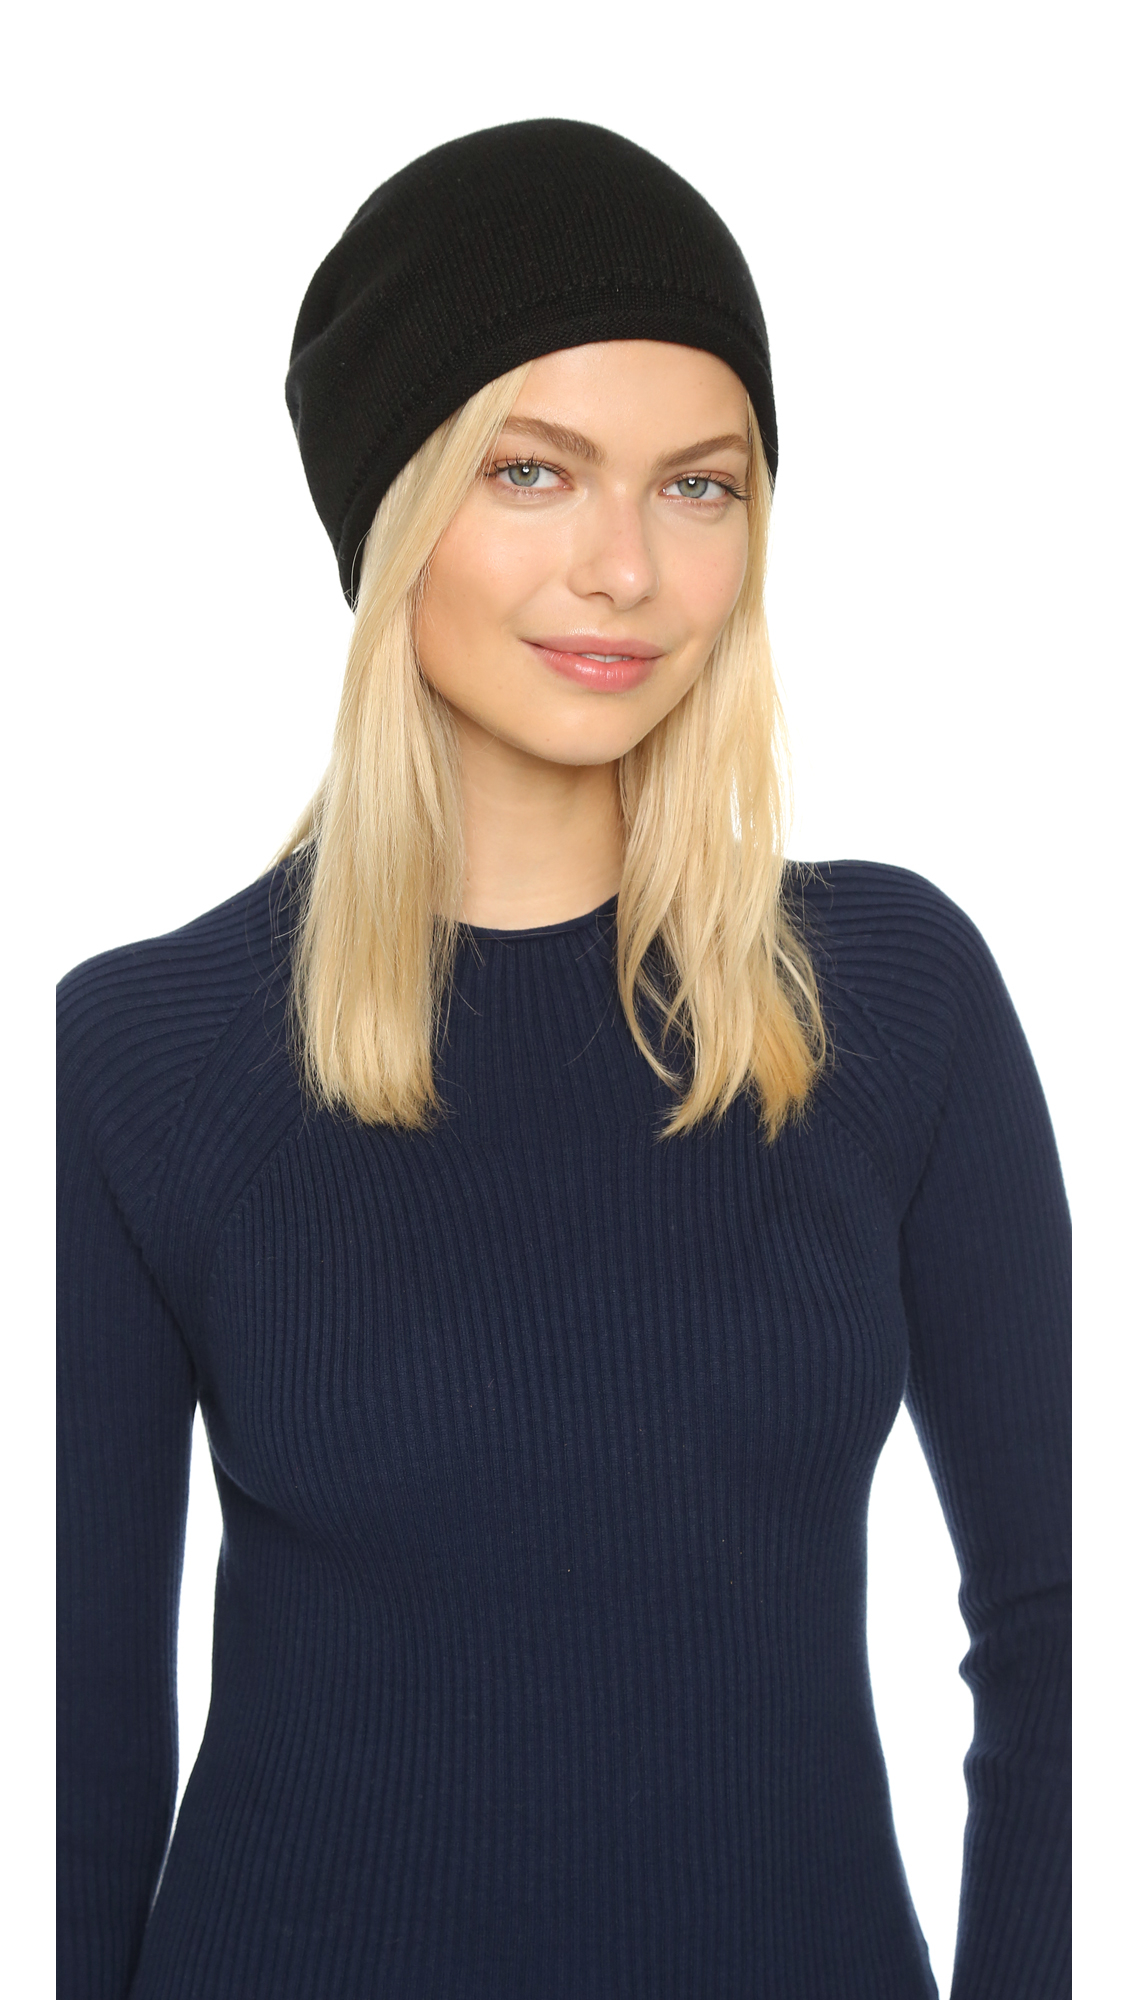 Lyst - 1717 Olive Cashmere Rolled Cuff Slouch Beanie Hat in Black